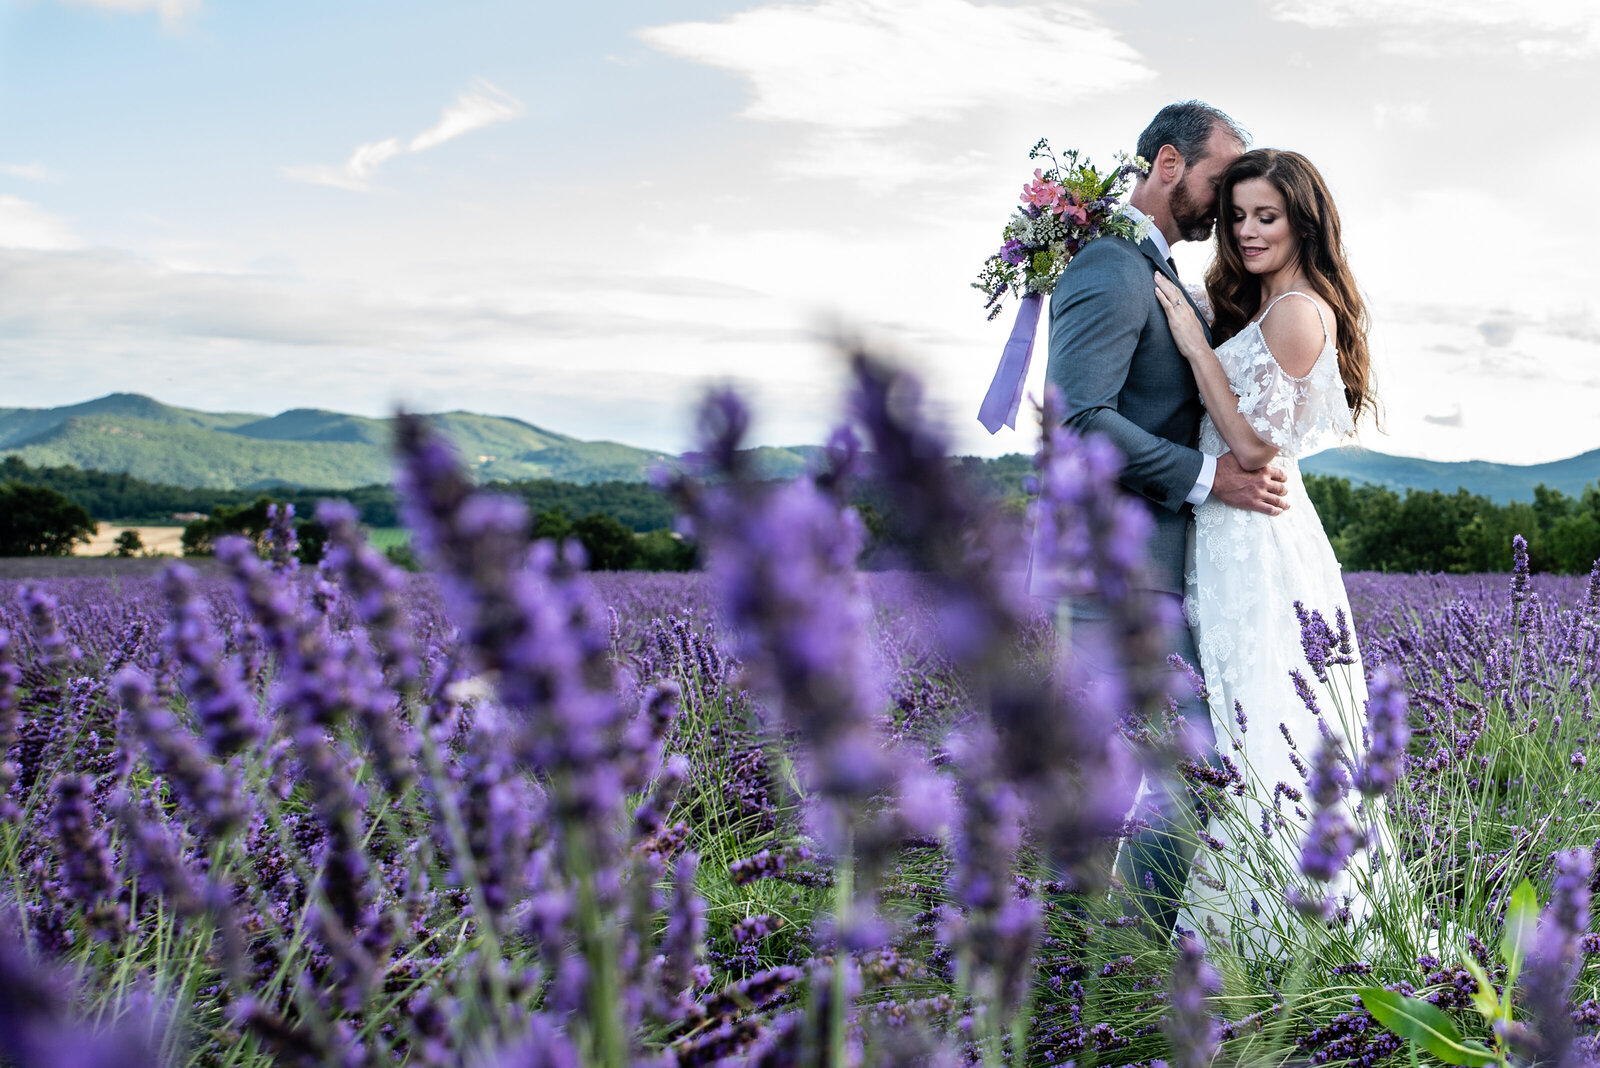 wedding photography lavender field bride and groom snuggling standing lavender in the foreground by Allison Burton